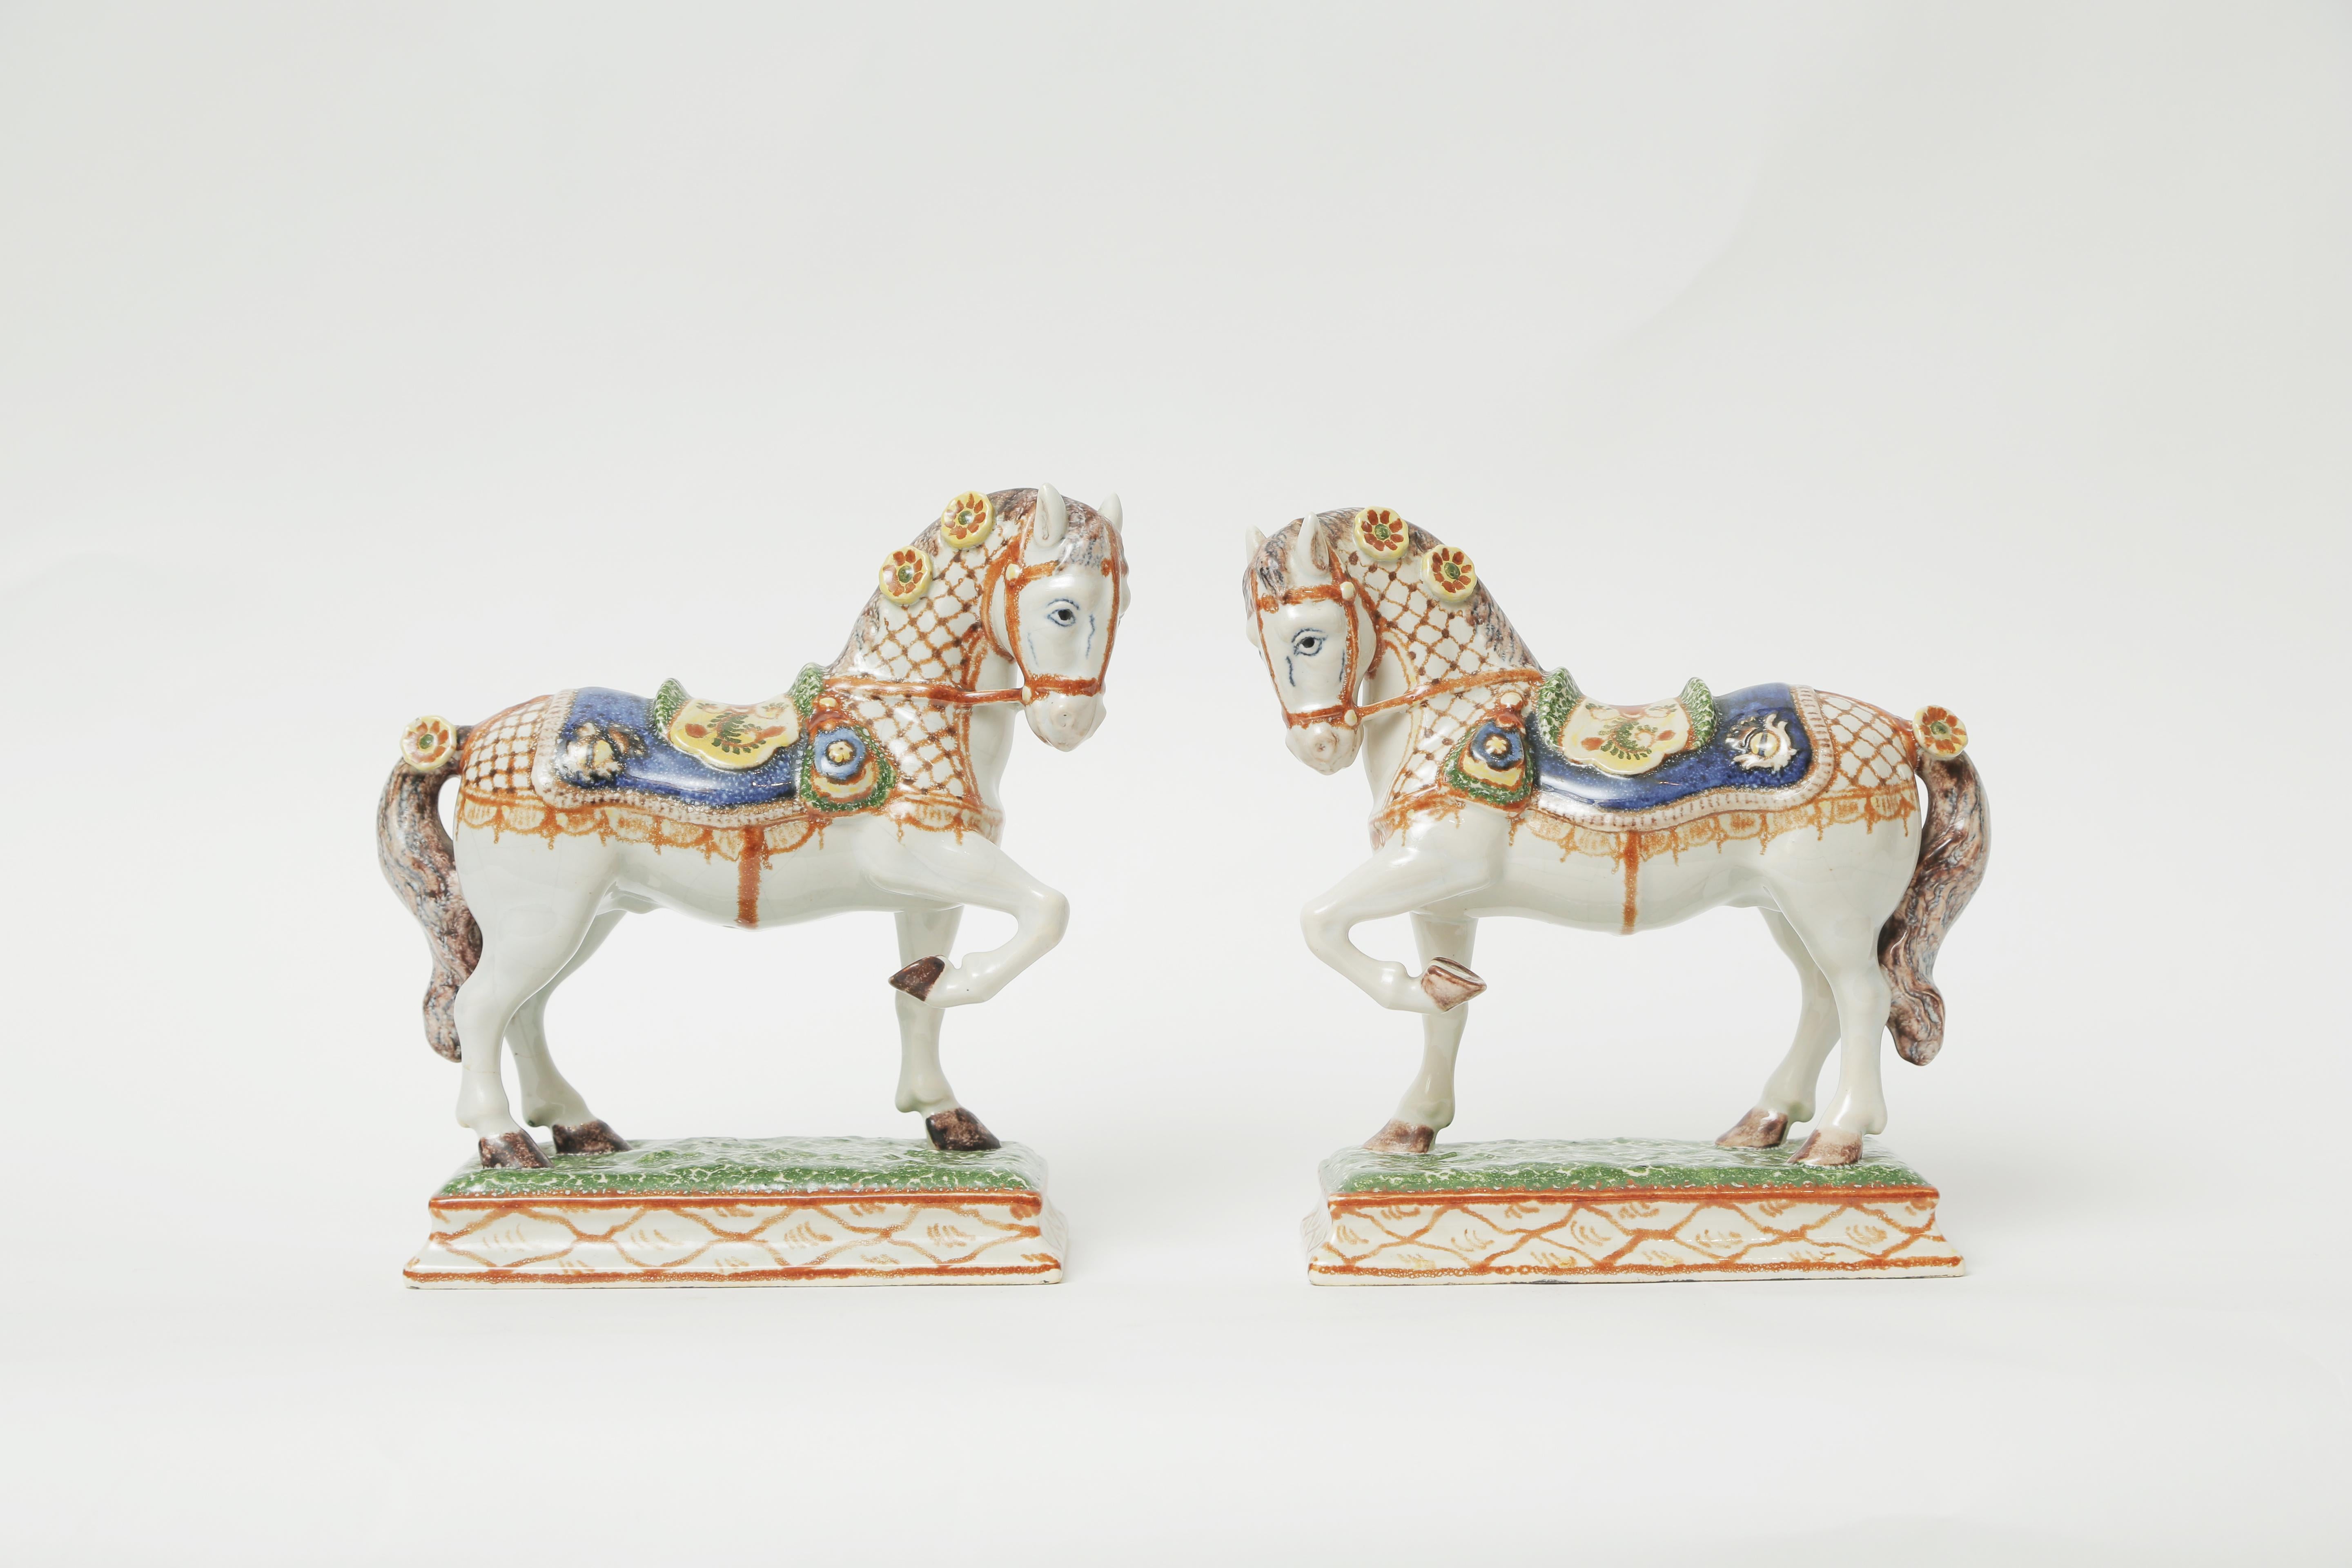 A charming, well sculpted and painted pair of horse figurines on a nice raised pedestal base. Wonderful attention to detail and great vivid coloring. Please note the dimensions as they are very impressive in size. In very nice antique condition and